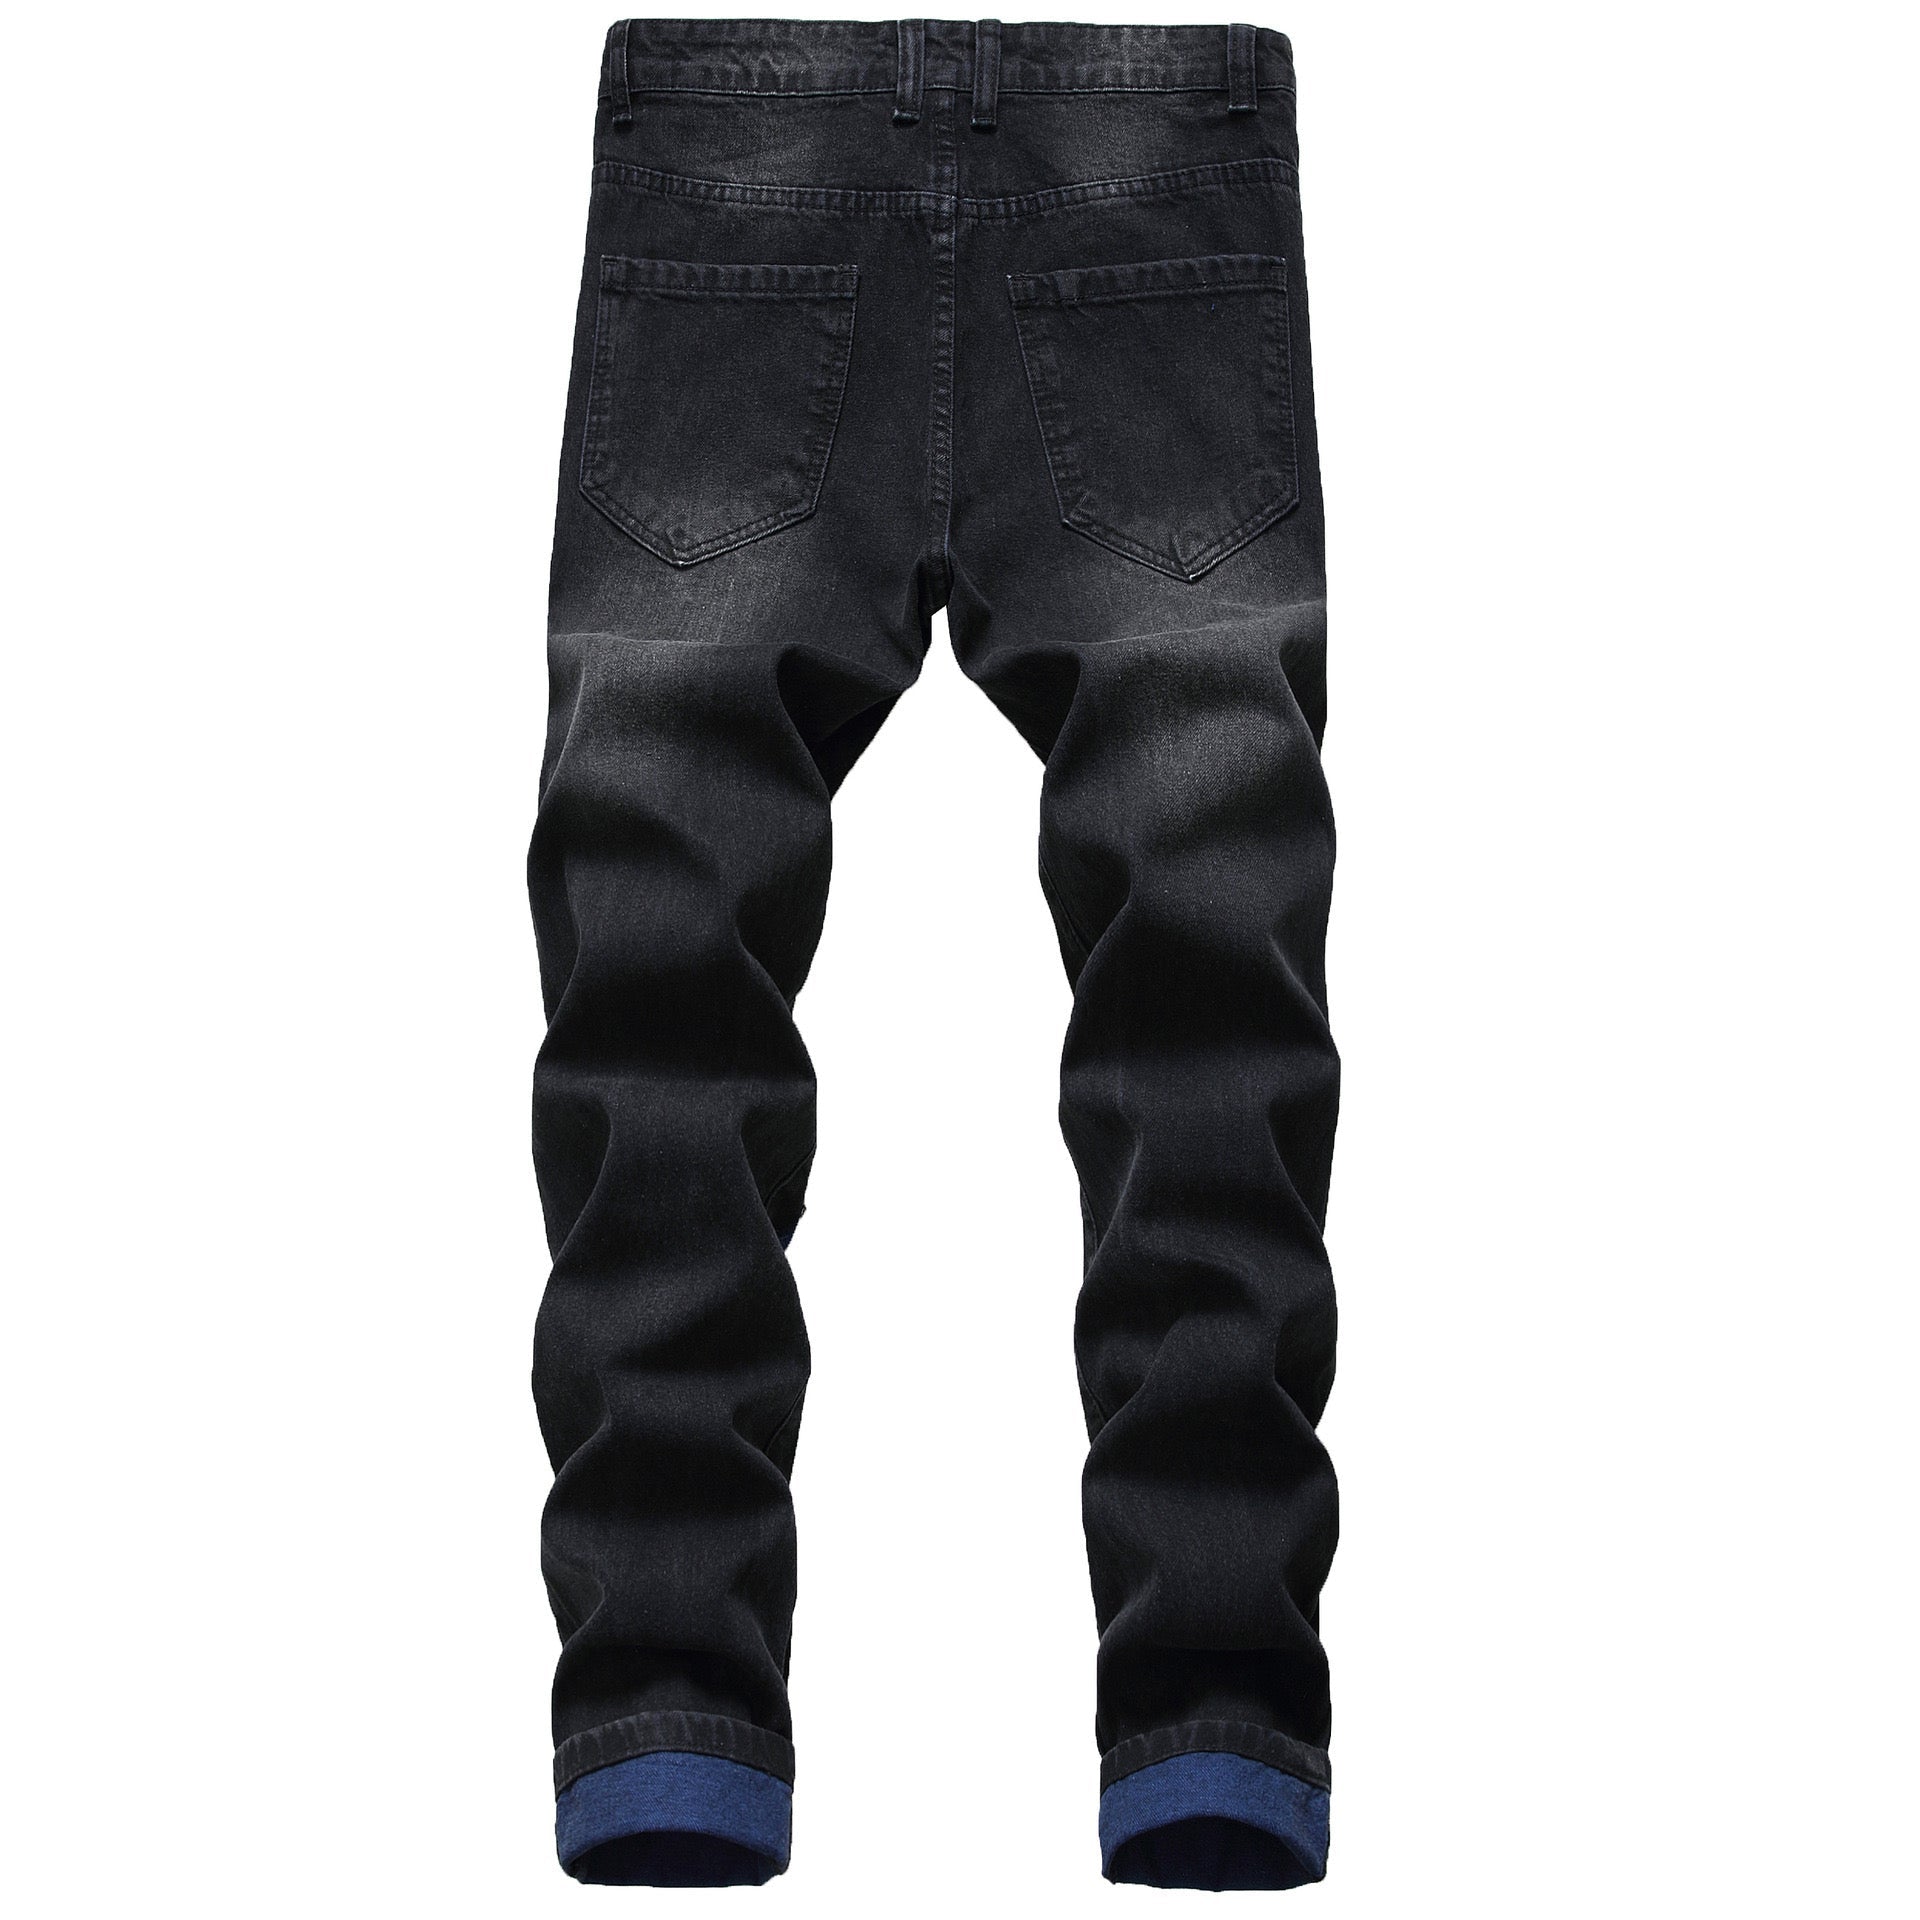 BLUI - Denim Jeans for Men - Sarman Fashion - Wholesale Clothing Fashion Brand for Men from Canada